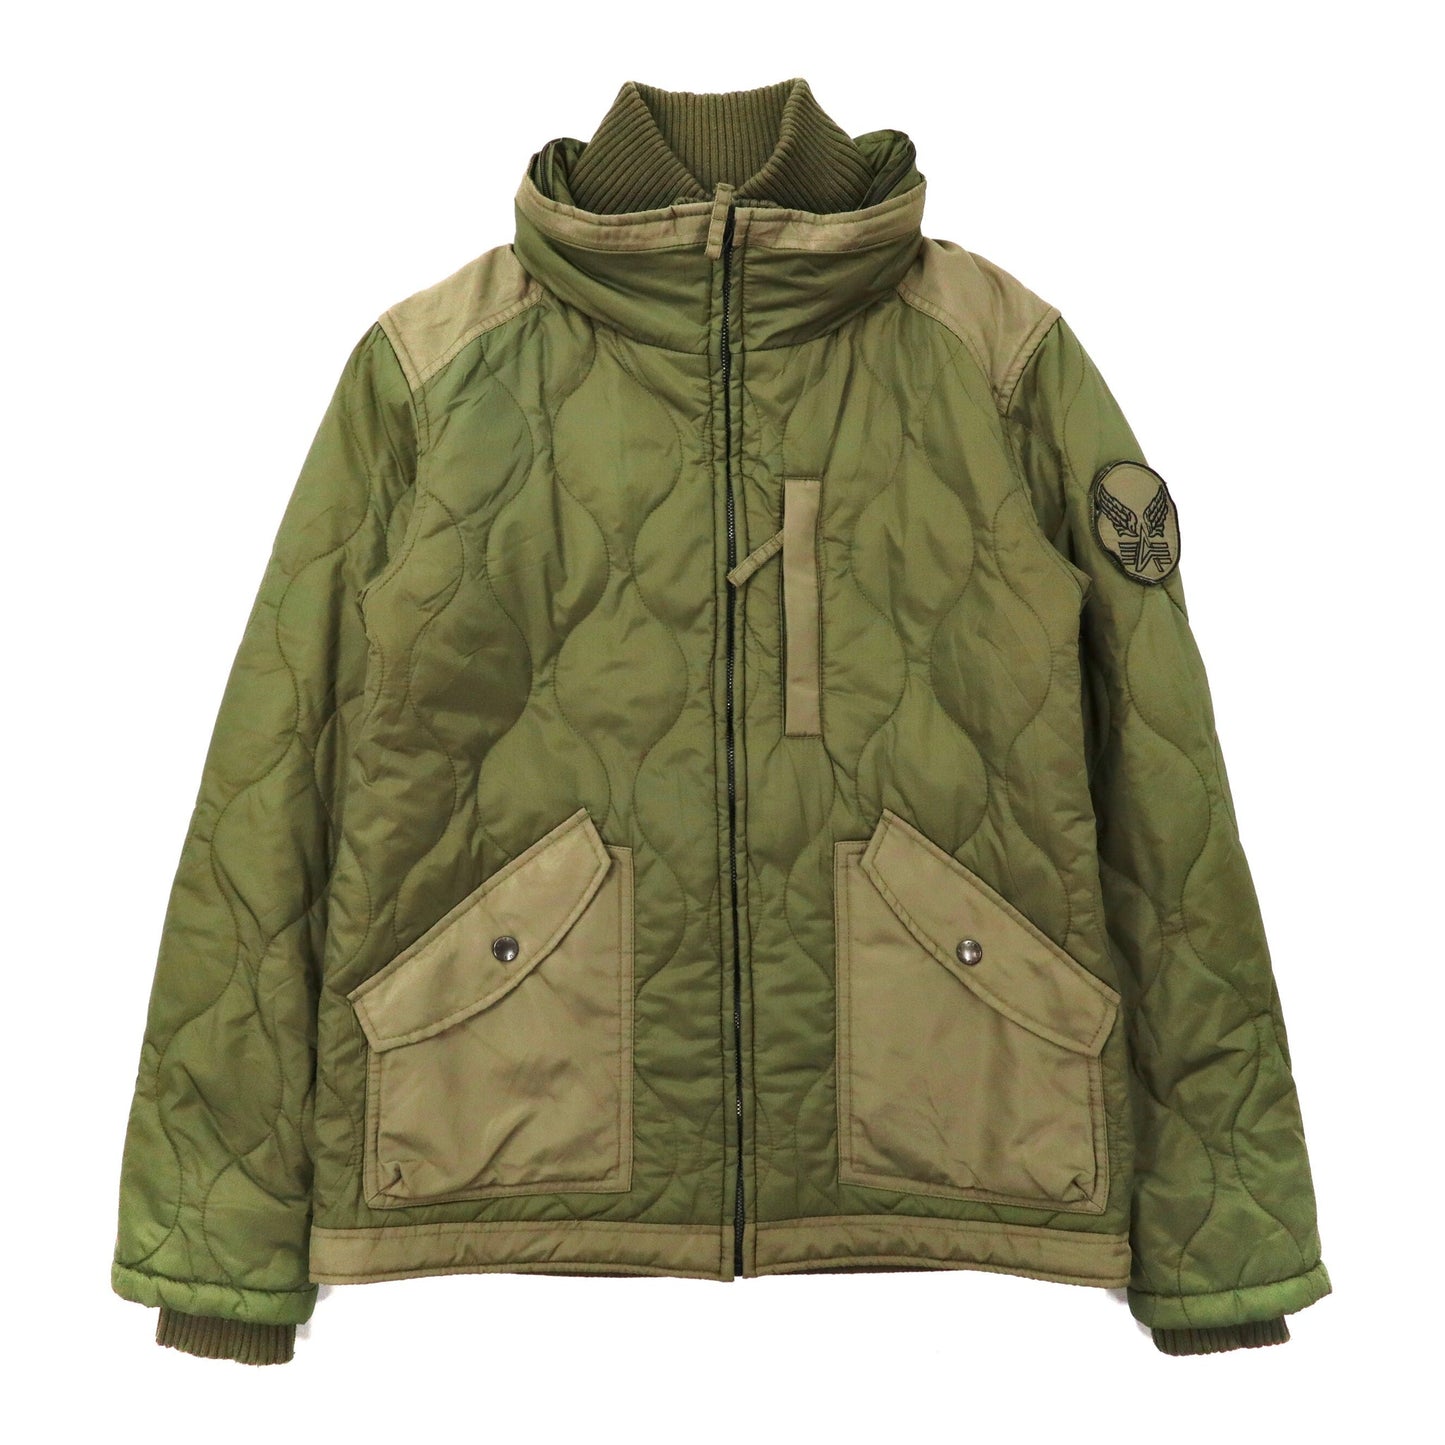 ALPHA INDUSTRIES INC. Military Quilted Jacket M Khaki Nylon Hoodie ...